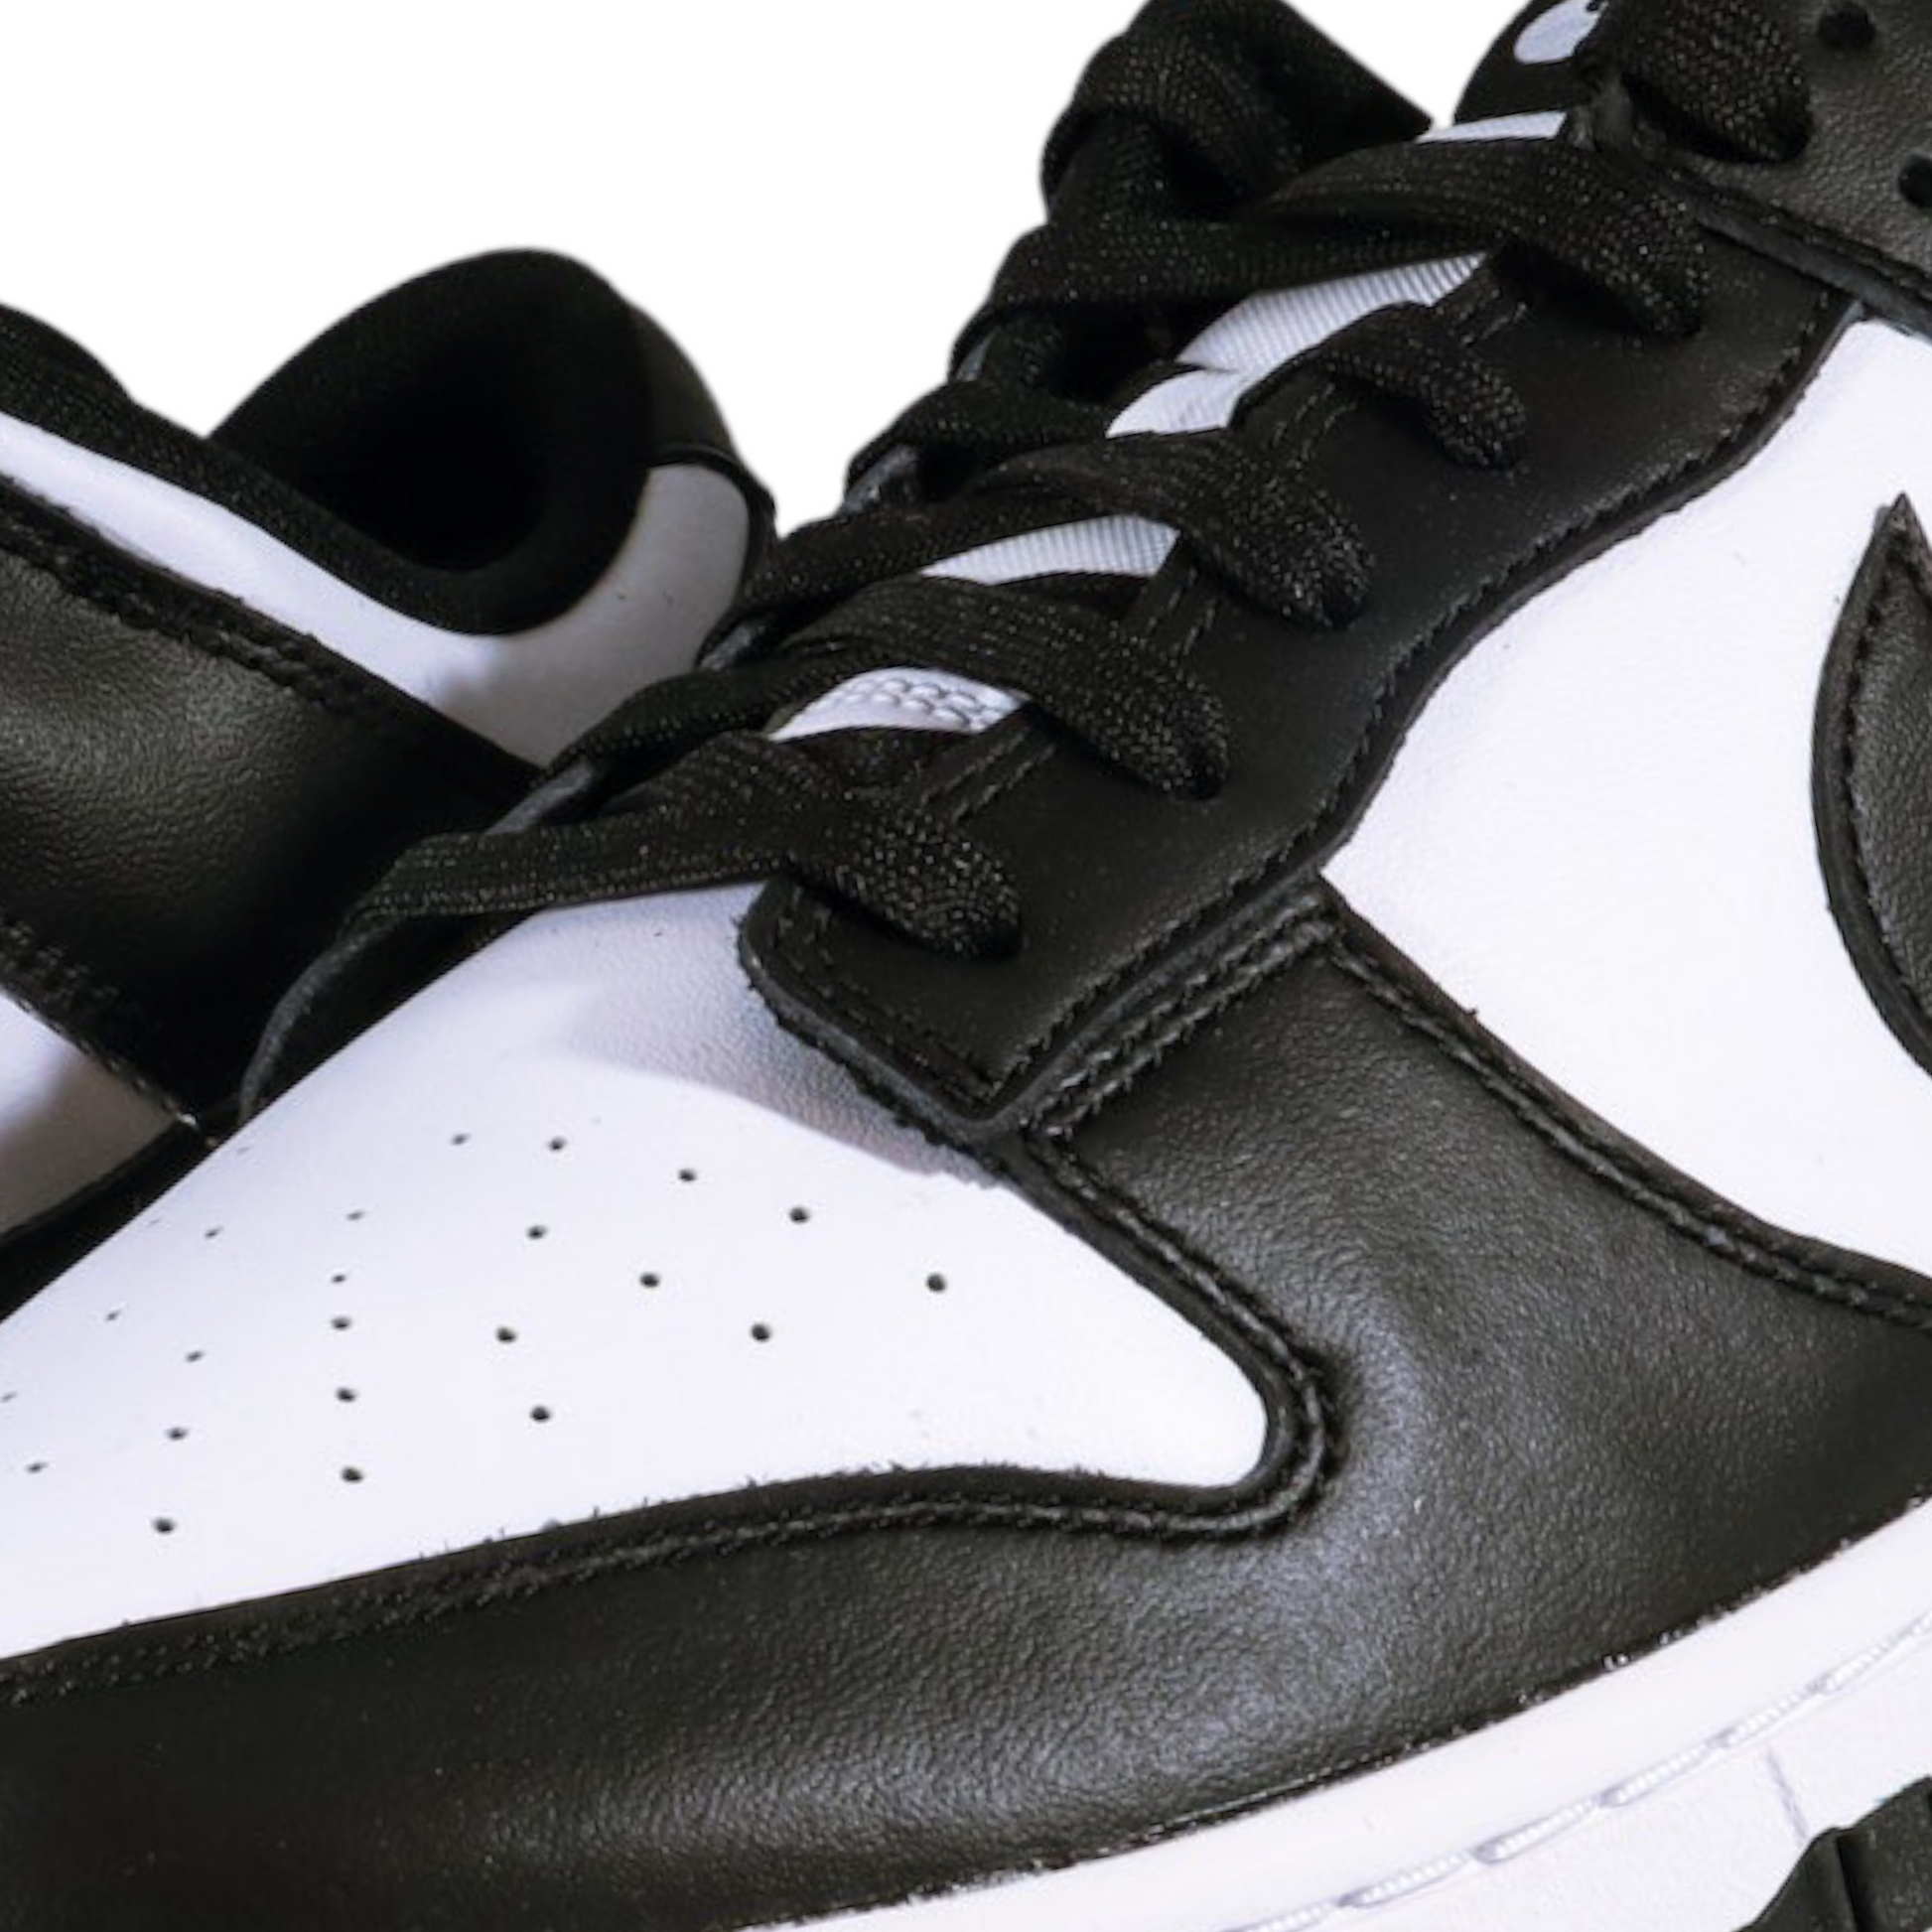 Game Classic Black Laces in Black and White Nike Sneakers